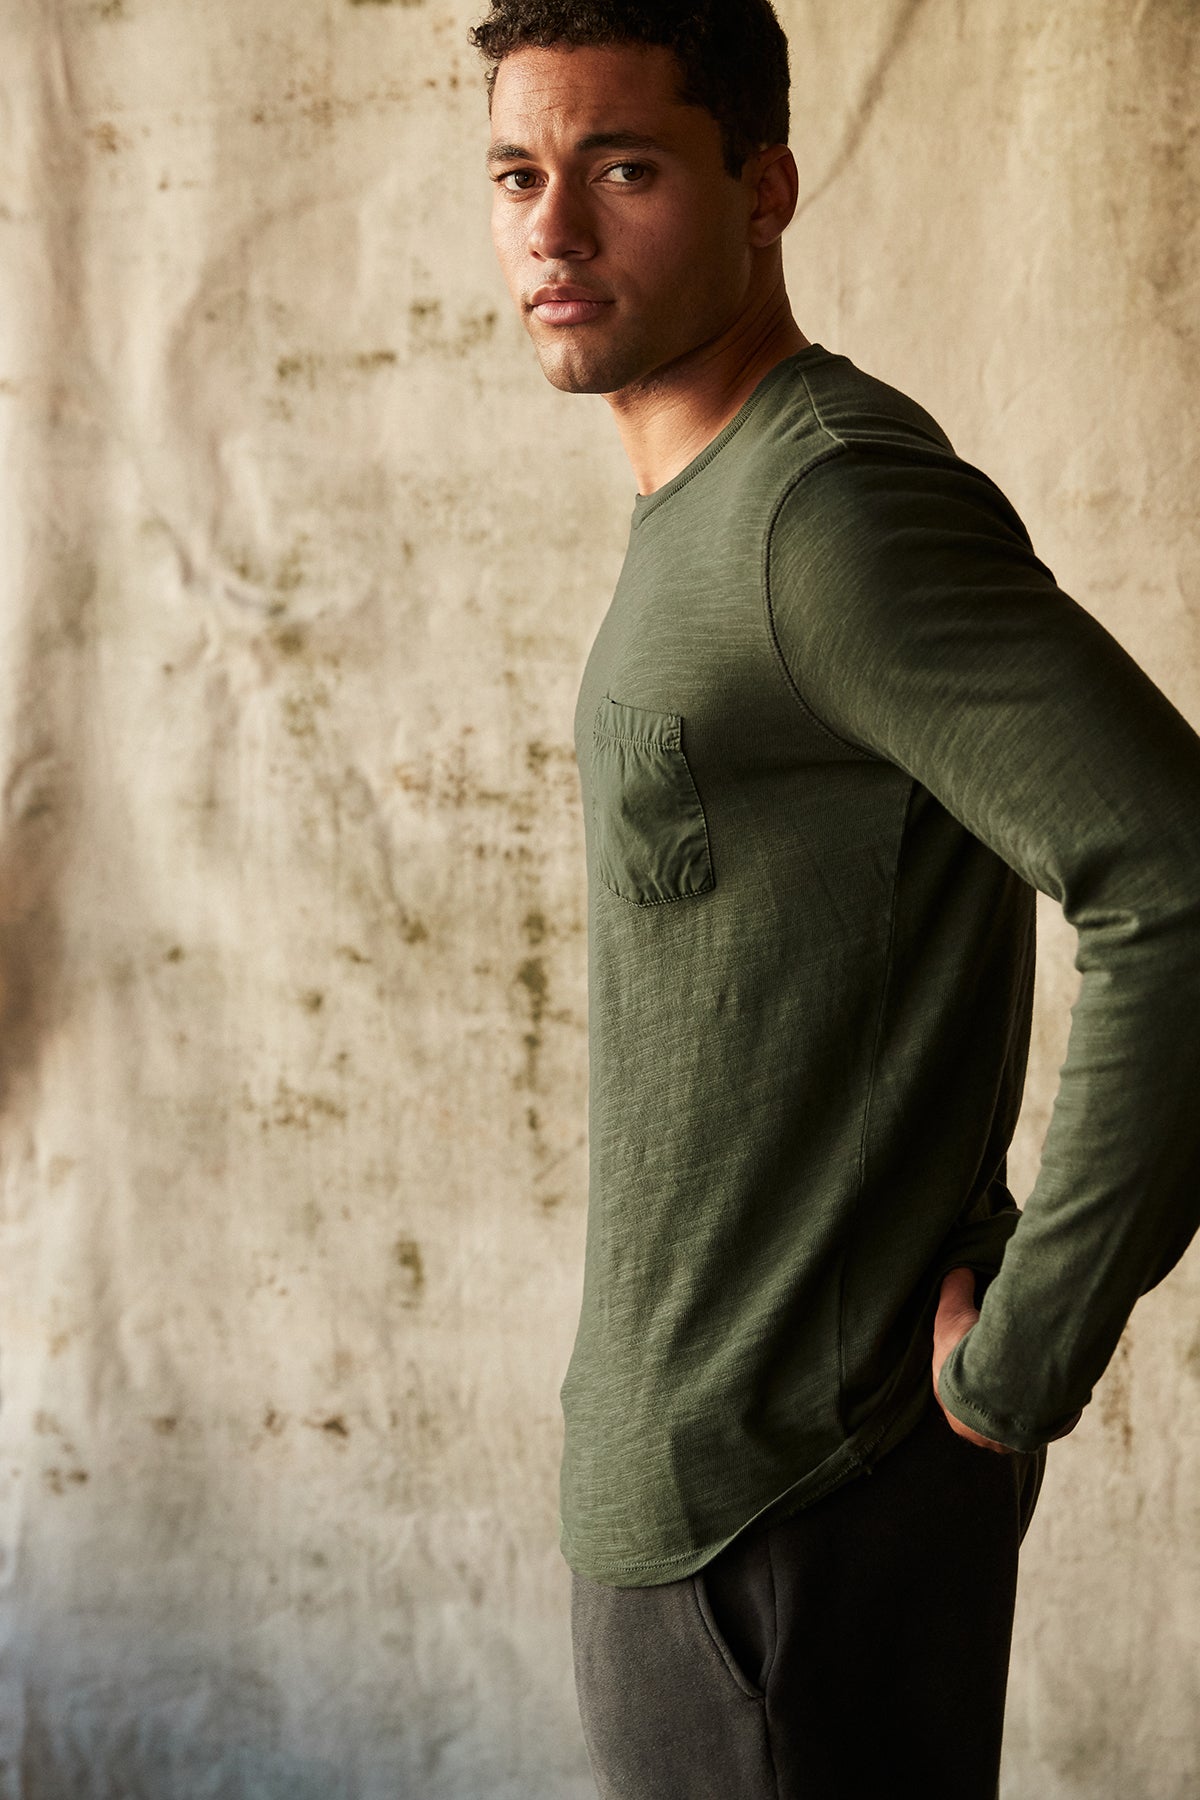 Victor Crew Neck Long Sleeve tee in palm green with dark grey sweatpants side-25854955978945